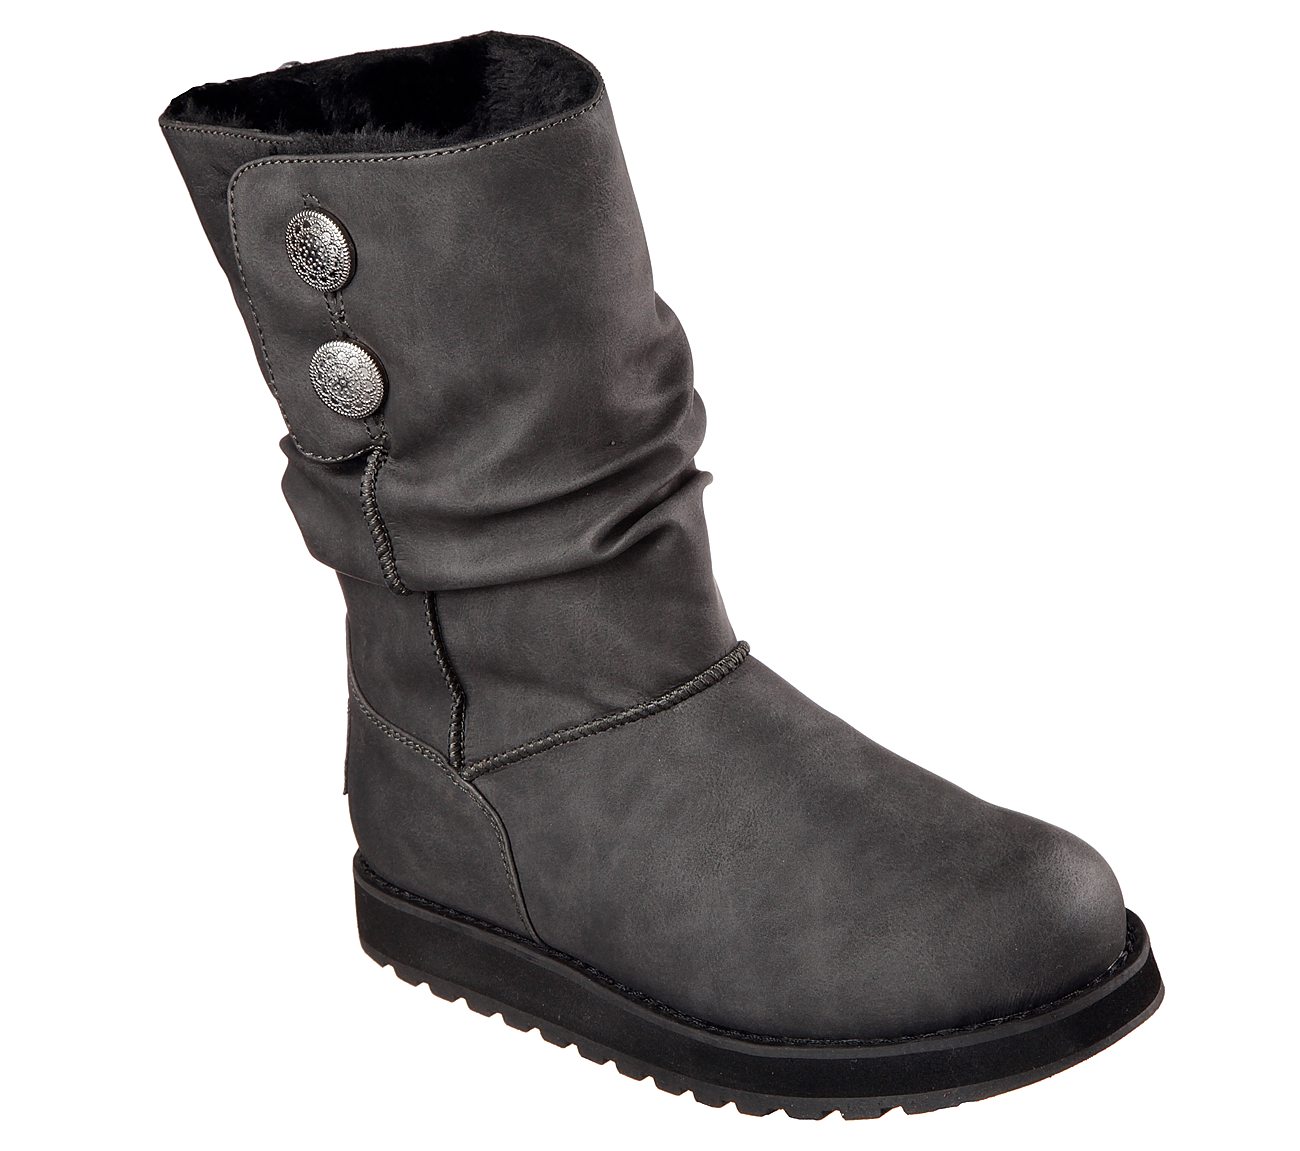 Buy SKECHERS Keepsakes - Leatherette Casual Boots Shoes